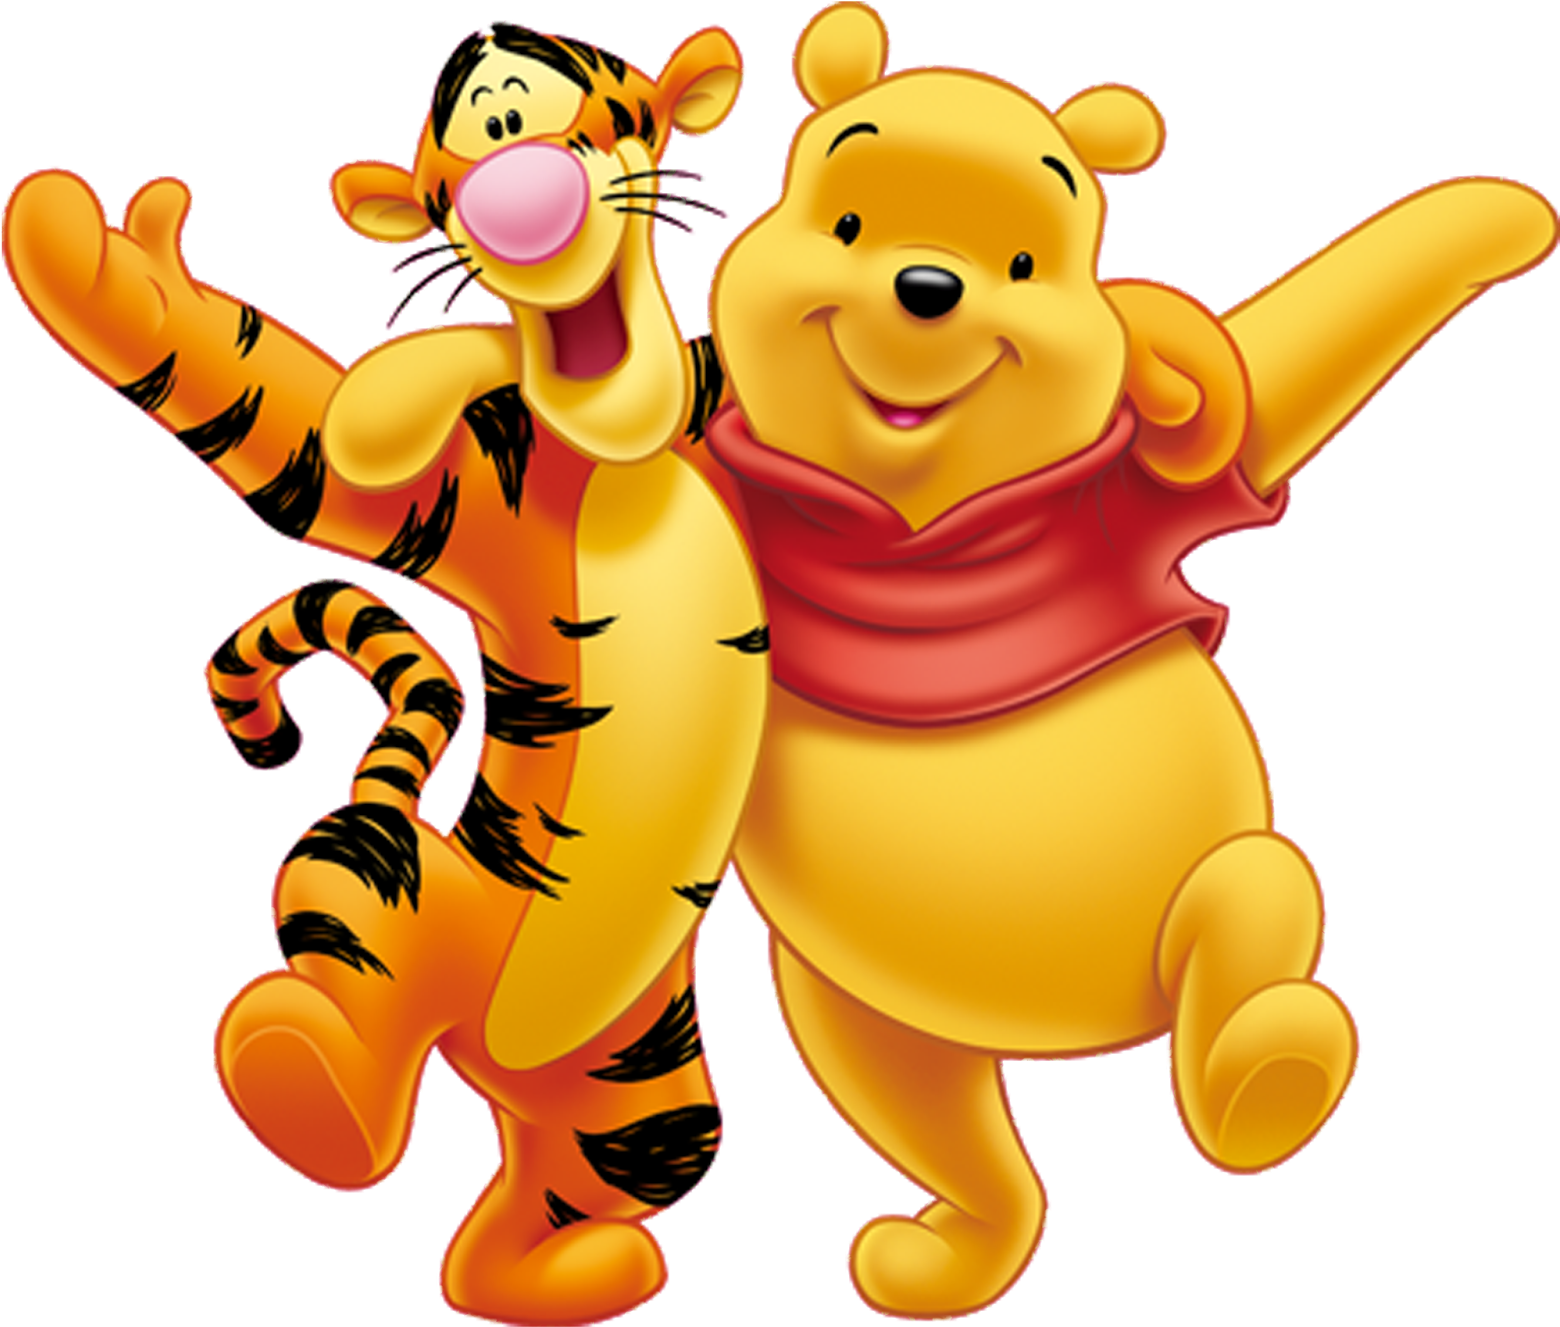 Image De Winnie Pooh - Winnie The Pooh And Tigger - (1600x1600) Png Clipart...